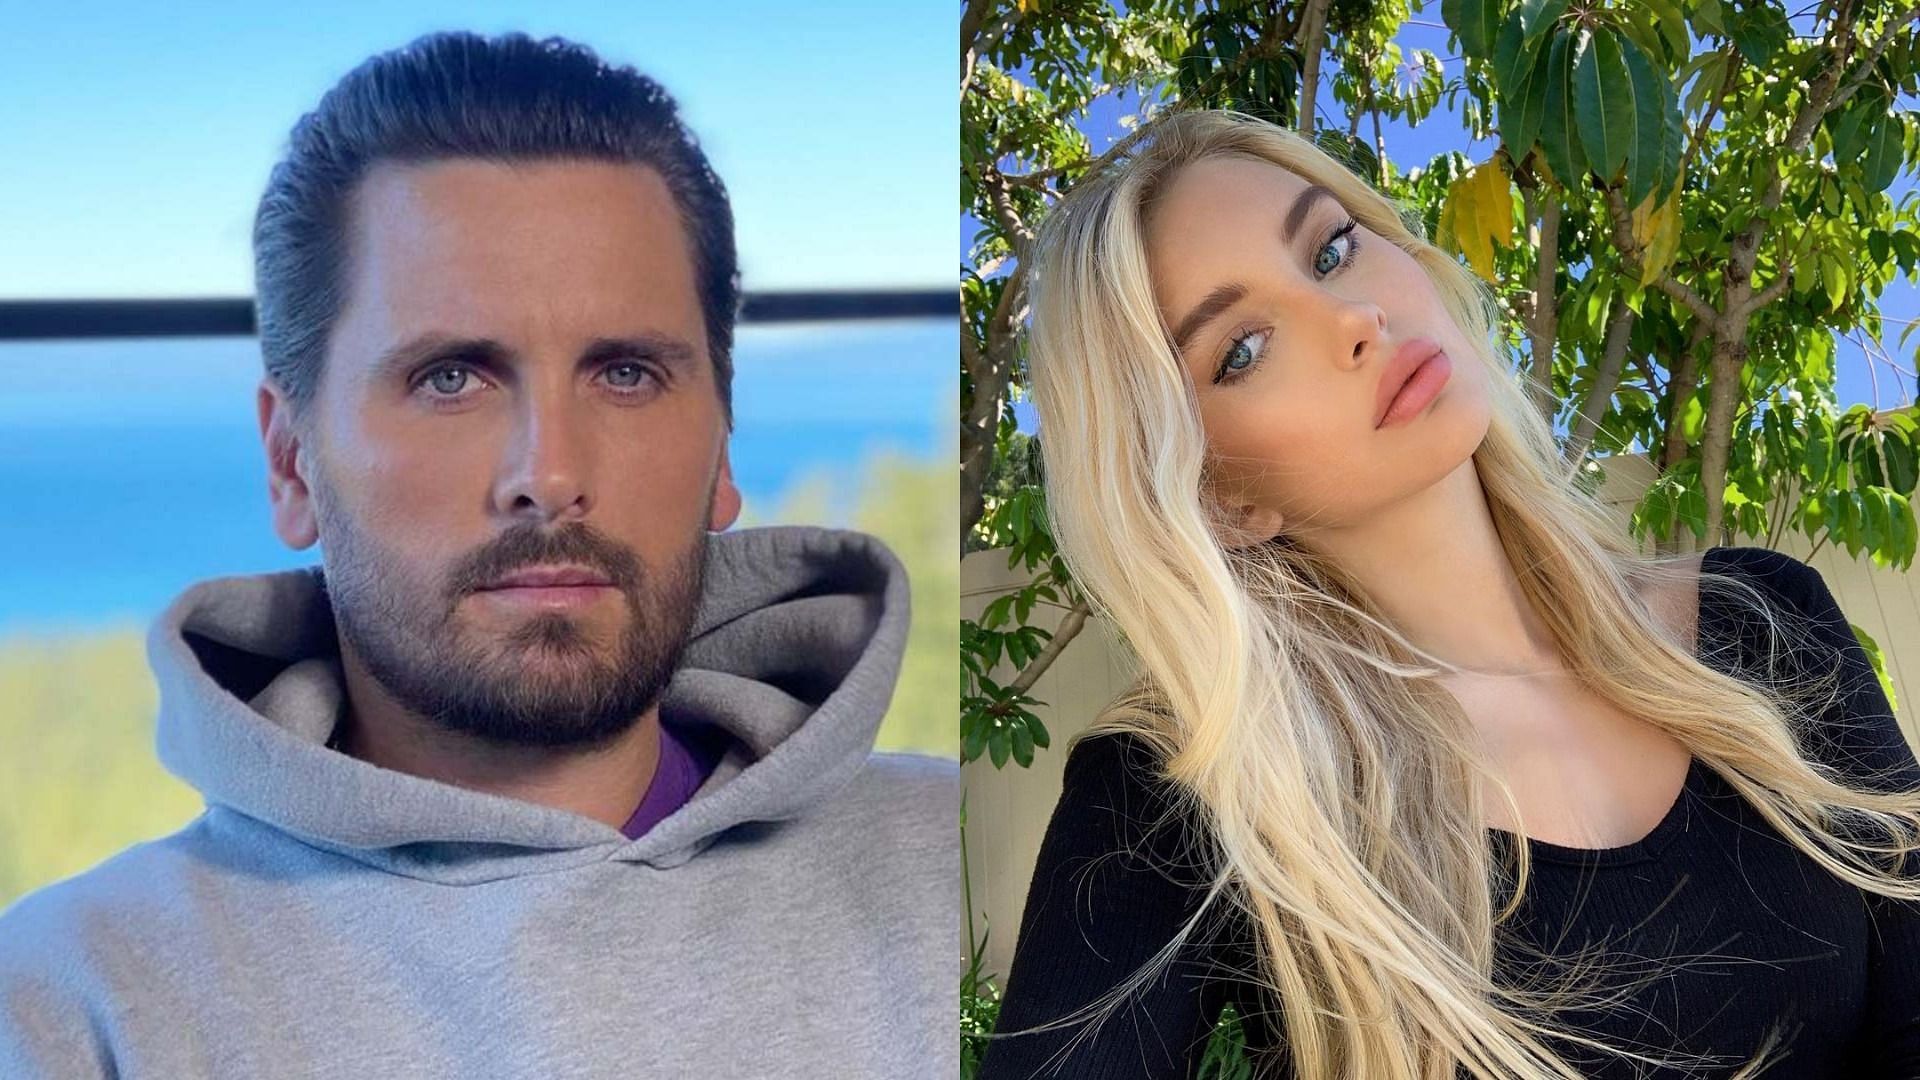 Scott Disick was spotted partying with 20-year-old Elizabeth Grace Lindley (Image via Getty Images and Elizabeth Grace Lindley/Instagram)